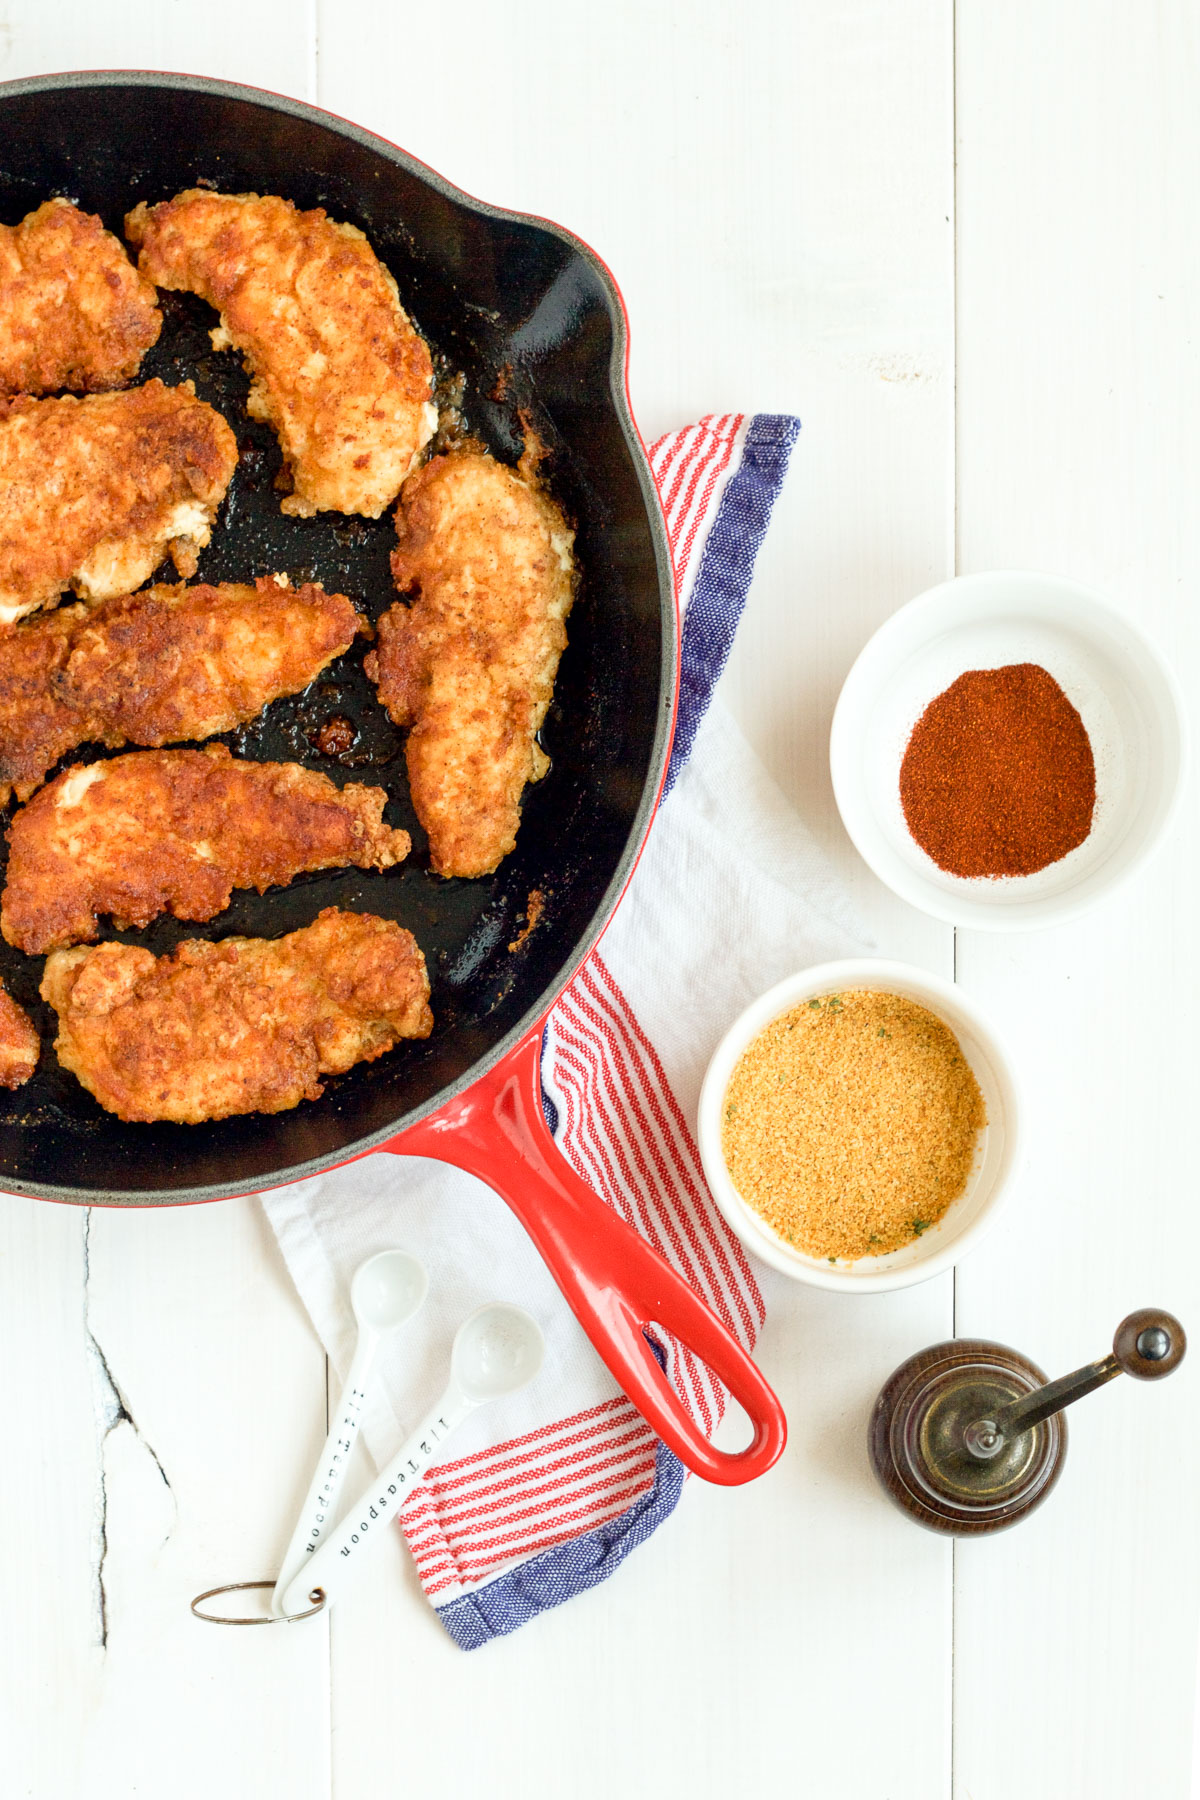 Mom's pan-fried chicken is a quick, easy, and wholesome version of everyone's comfort food favorite!